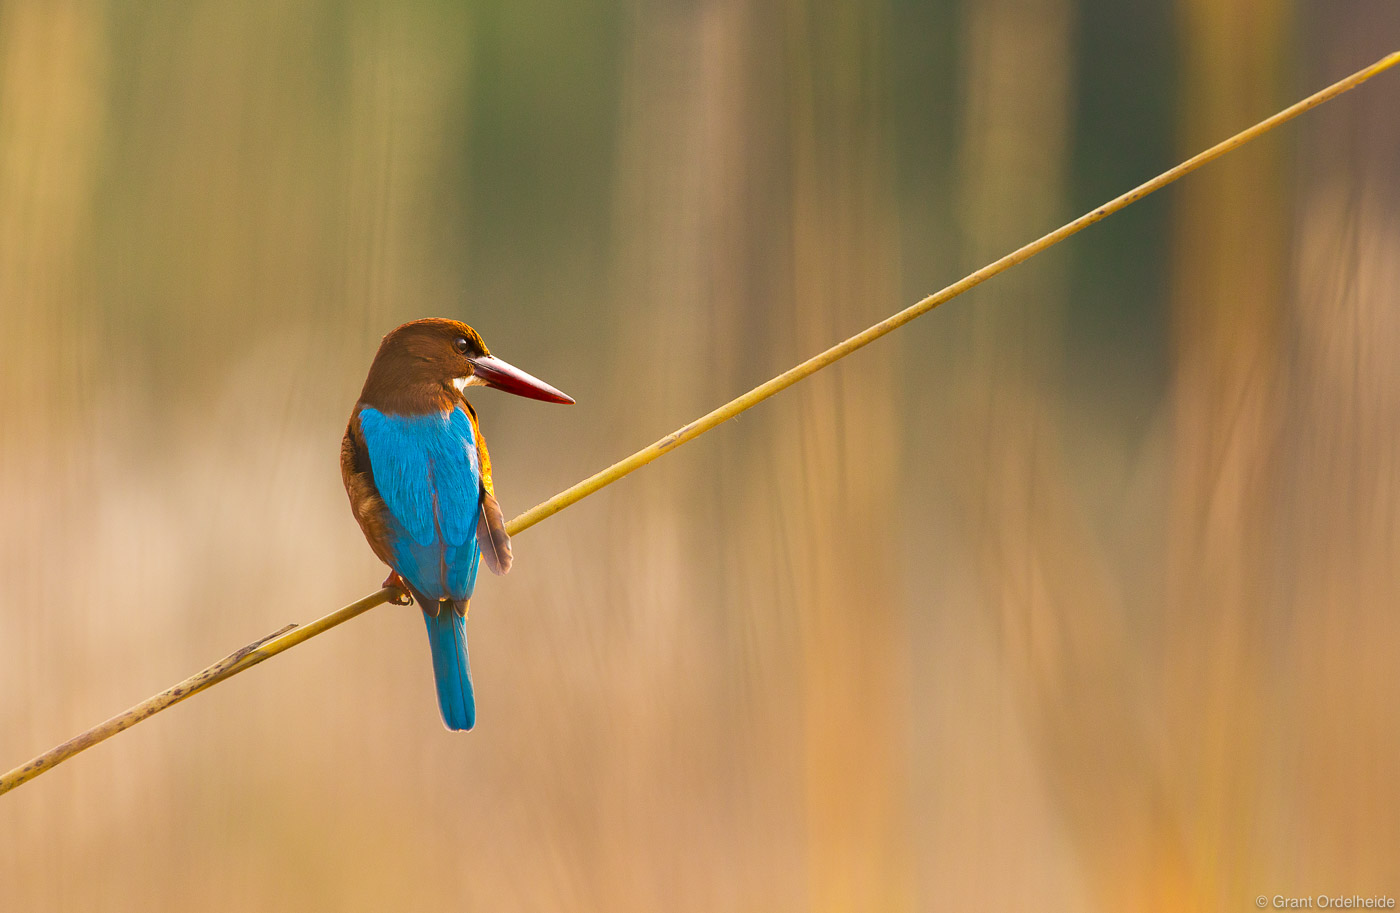 A kingfisher bird sits among the reeds in Bandhavgarh National Park.